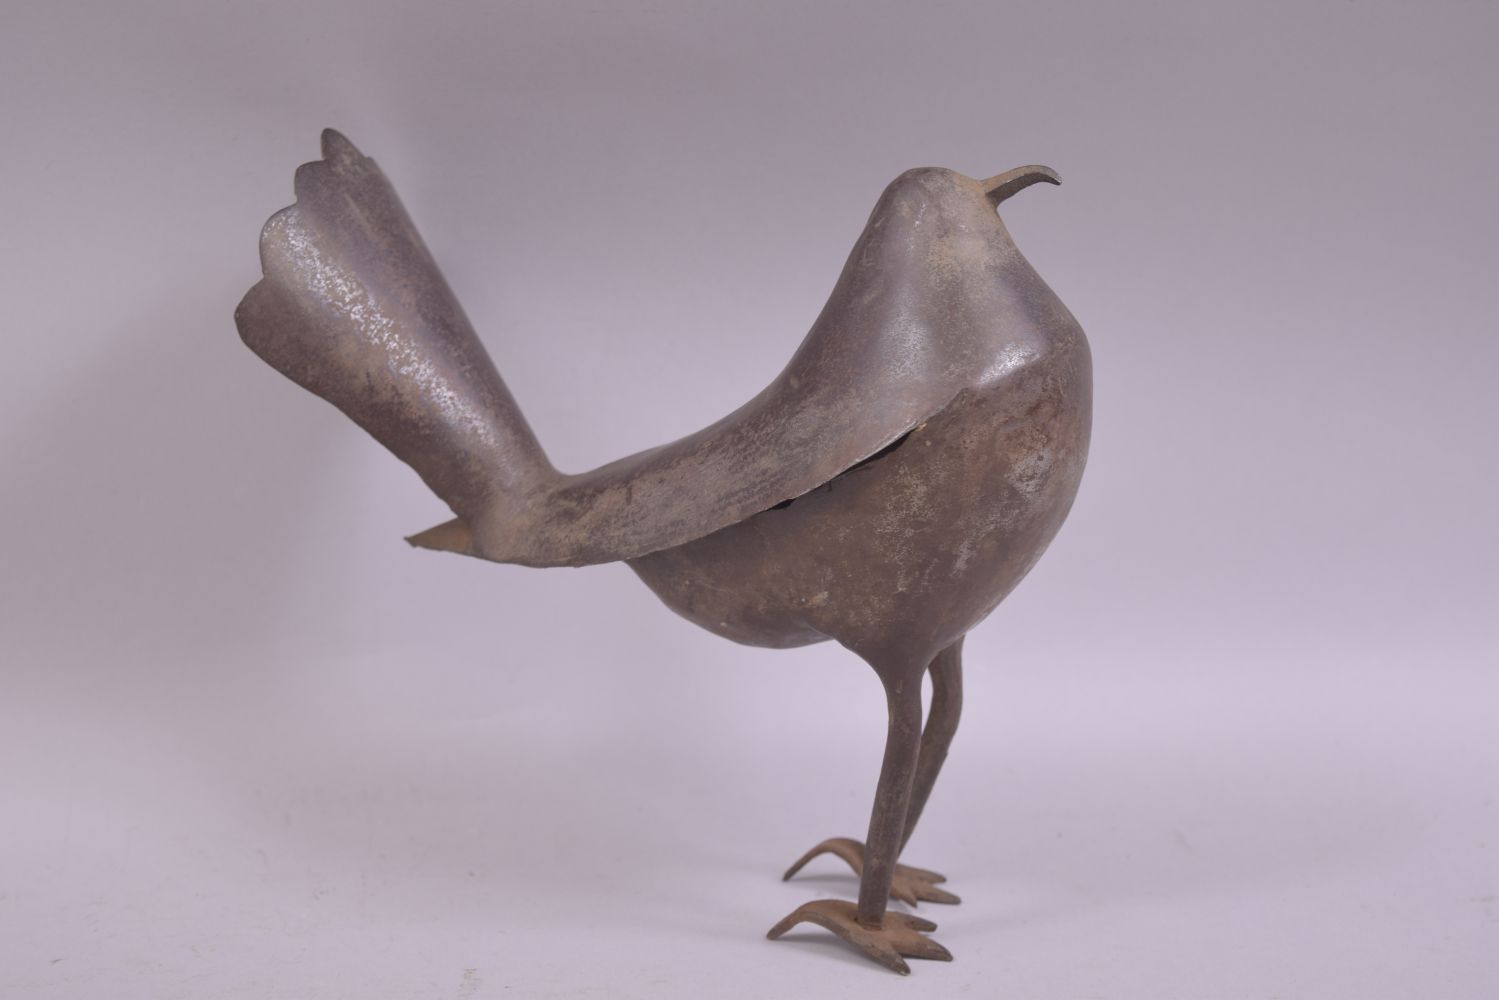 TWO 19TH CENTURY PERSIAN QAJAR STEEL MODELS OF BIRDS, each approx. 20cm long. - Image 6 of 9